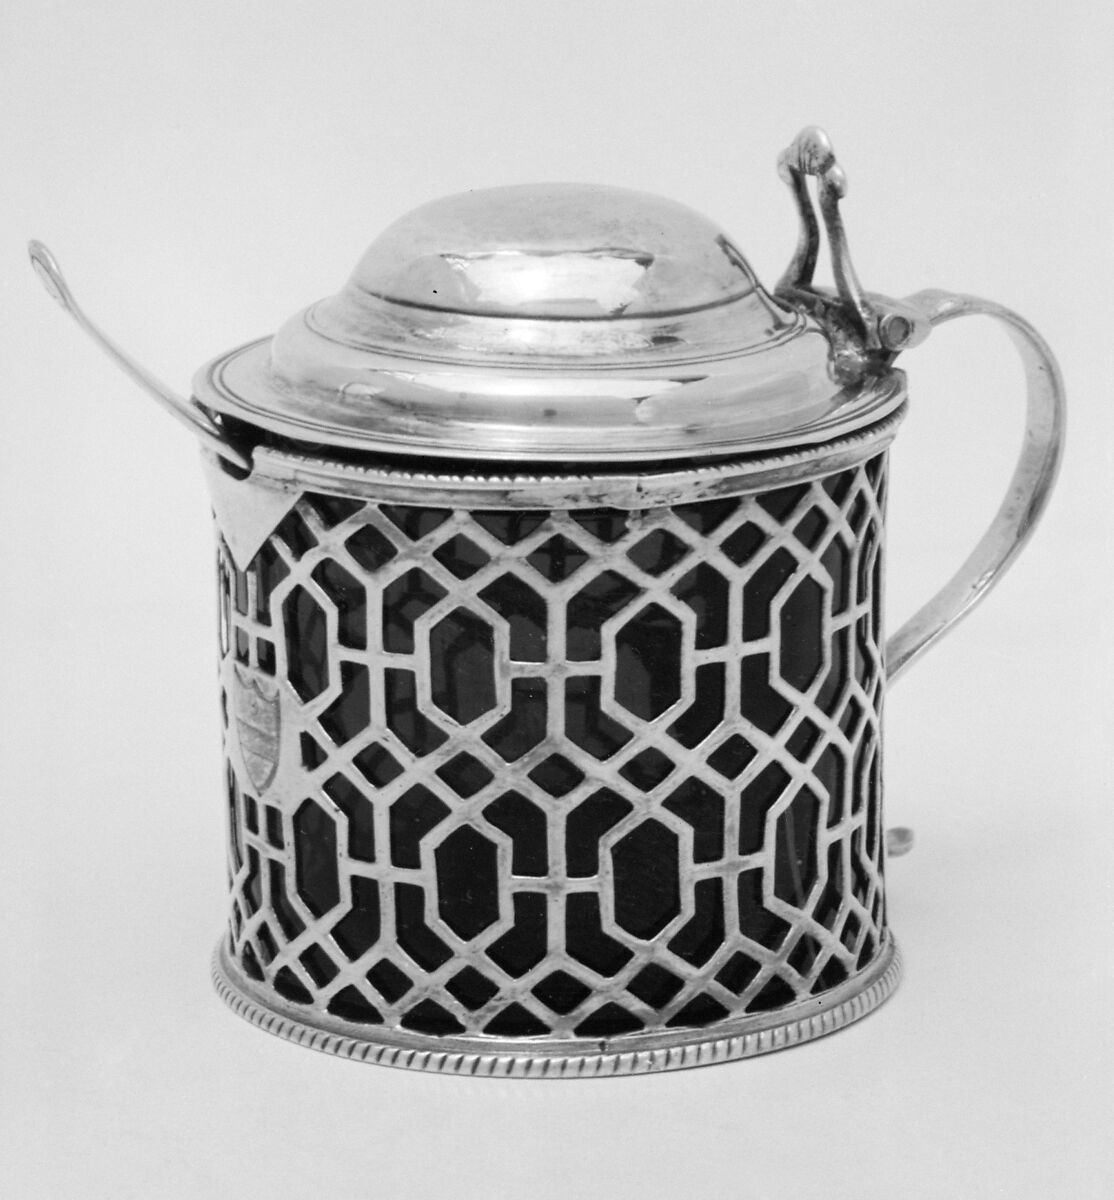 Mustard pot and spoon (one of a pair), Edward Aldridge II (active 1758– after 1781), Silver, British, London 